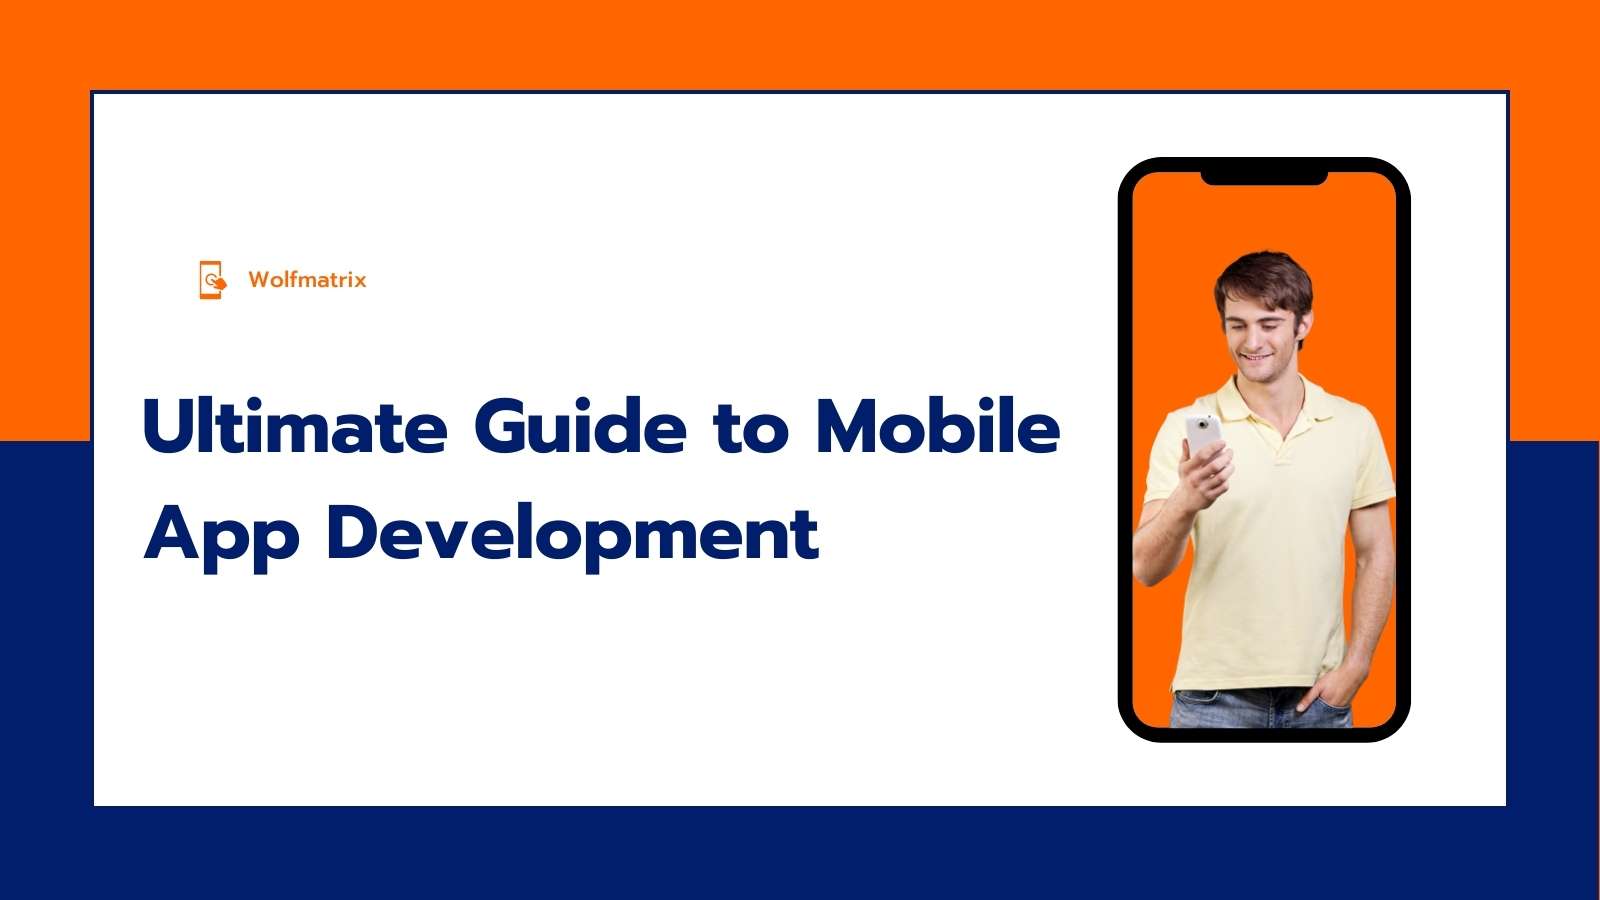 Ultimate Guide to Mobile App Development - Wolfmatrix